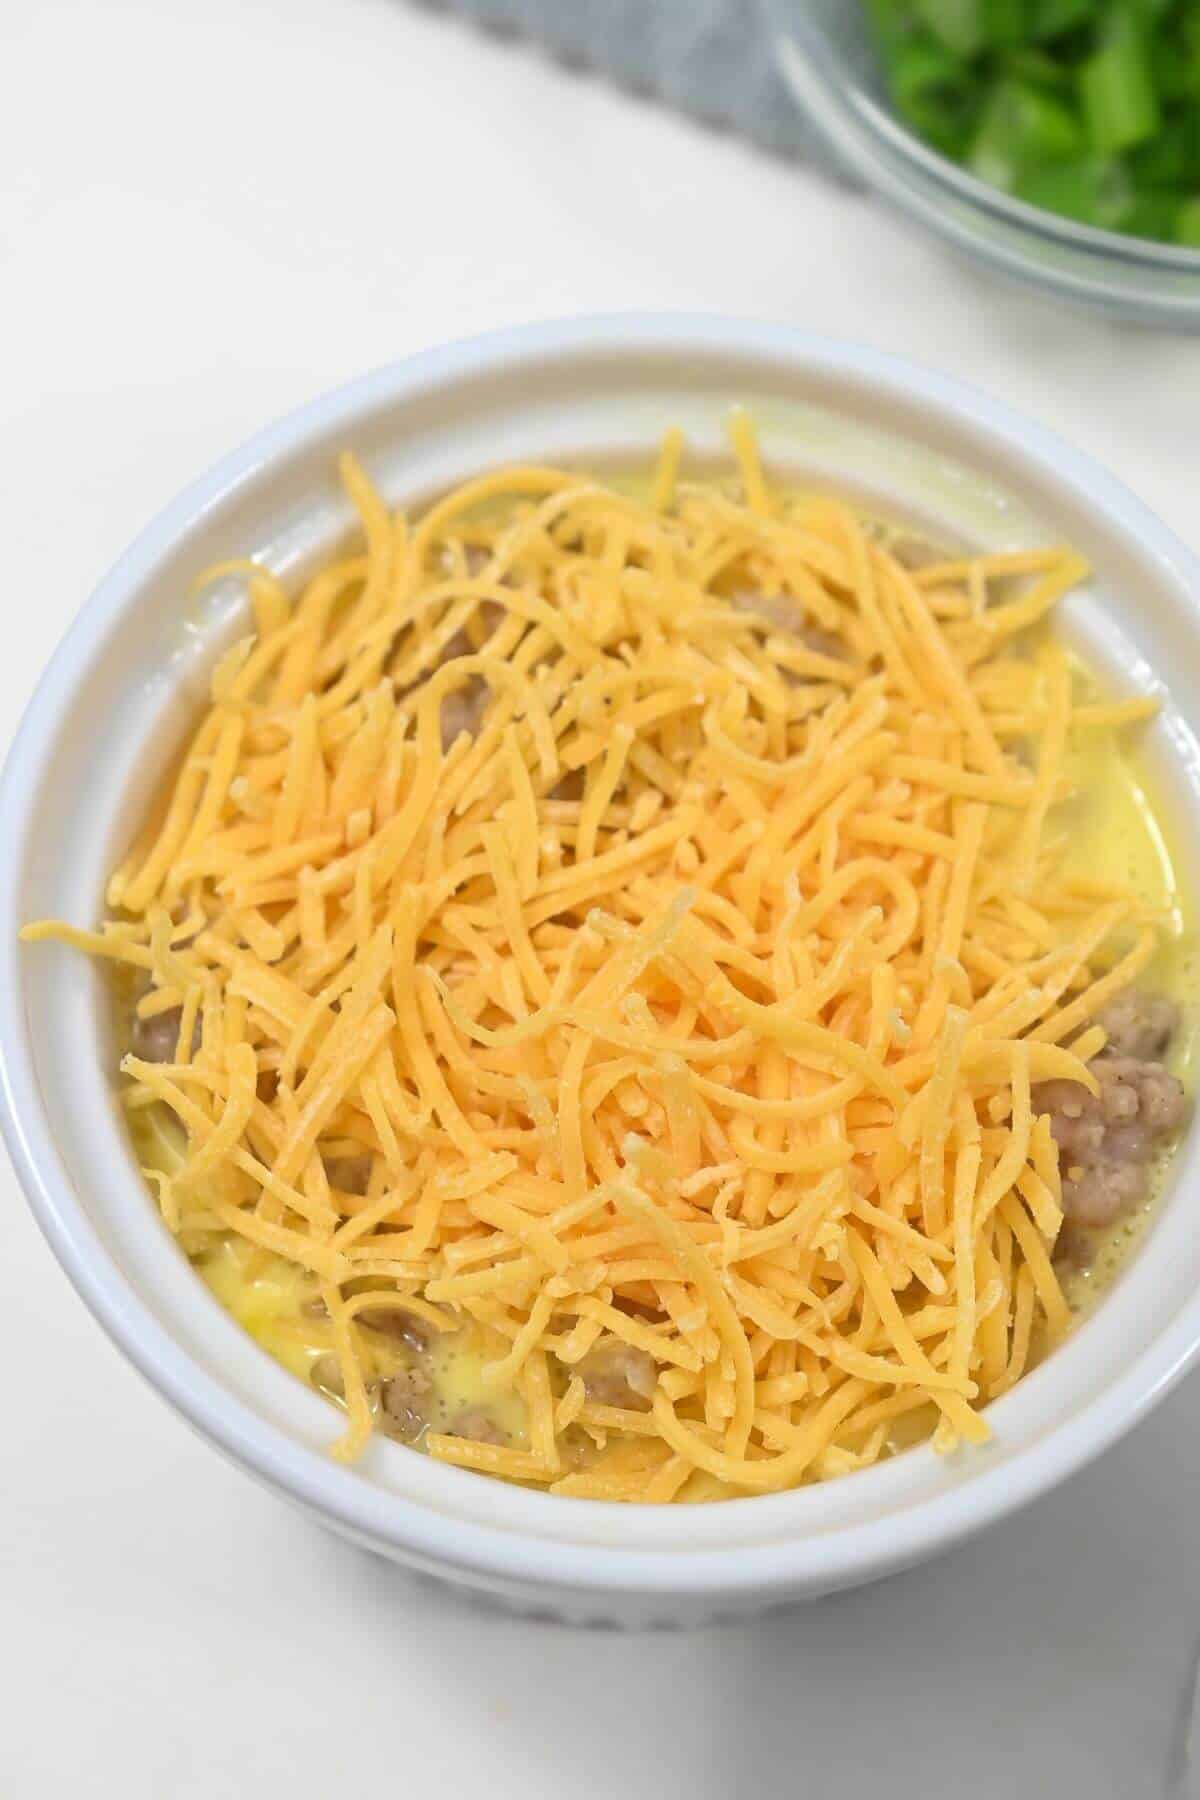 A biscuit breakfast casserole topped with shredded cheddar cheese.